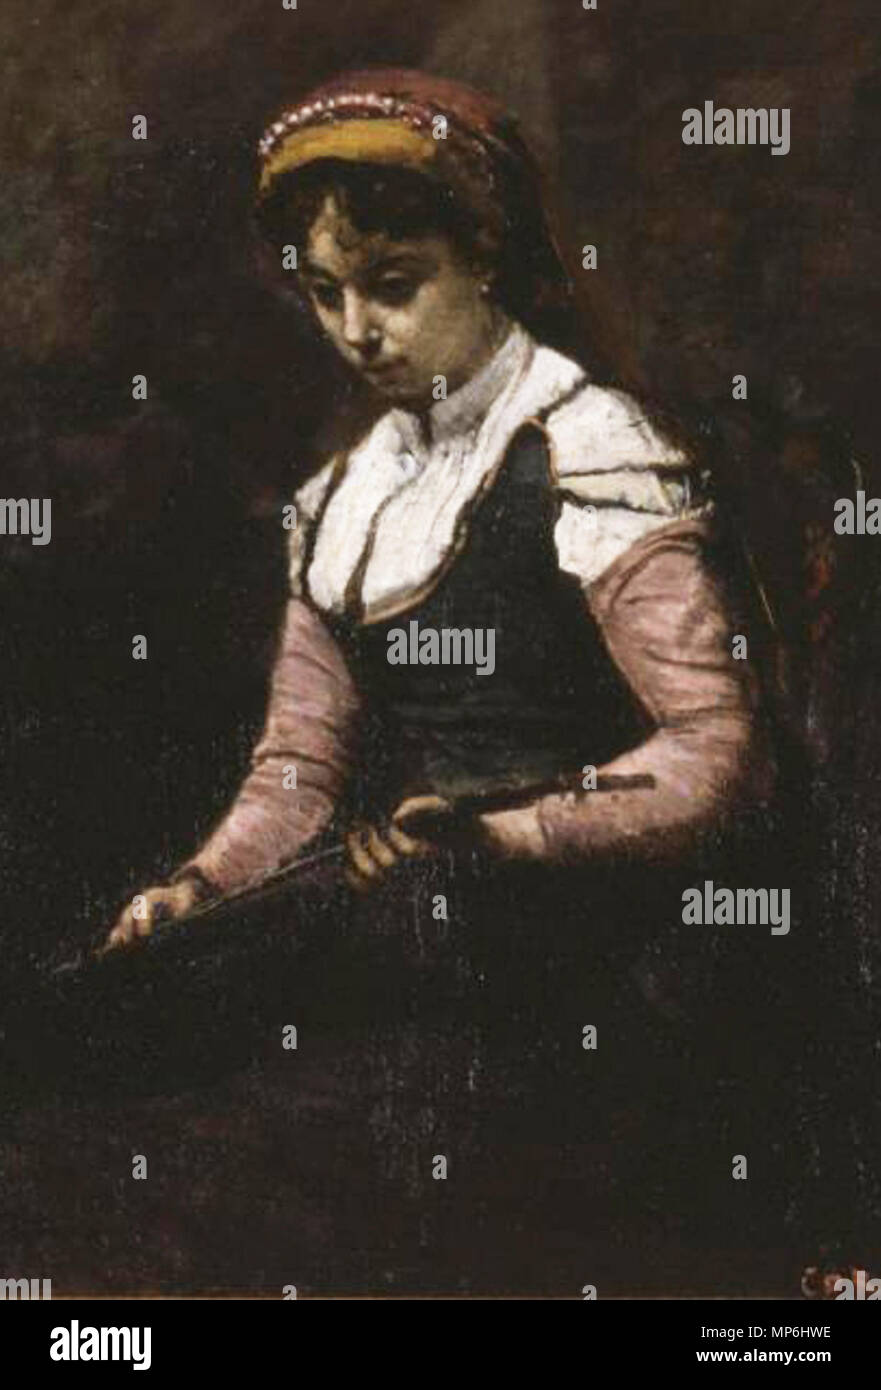 714 Jean-Baptiste-Camille Corot, 1860–65, Girl with Mandolin, oil on canvas, 51.4 x 40.3 cm, Saint Louis Art Museum (cropped) Stock Photo